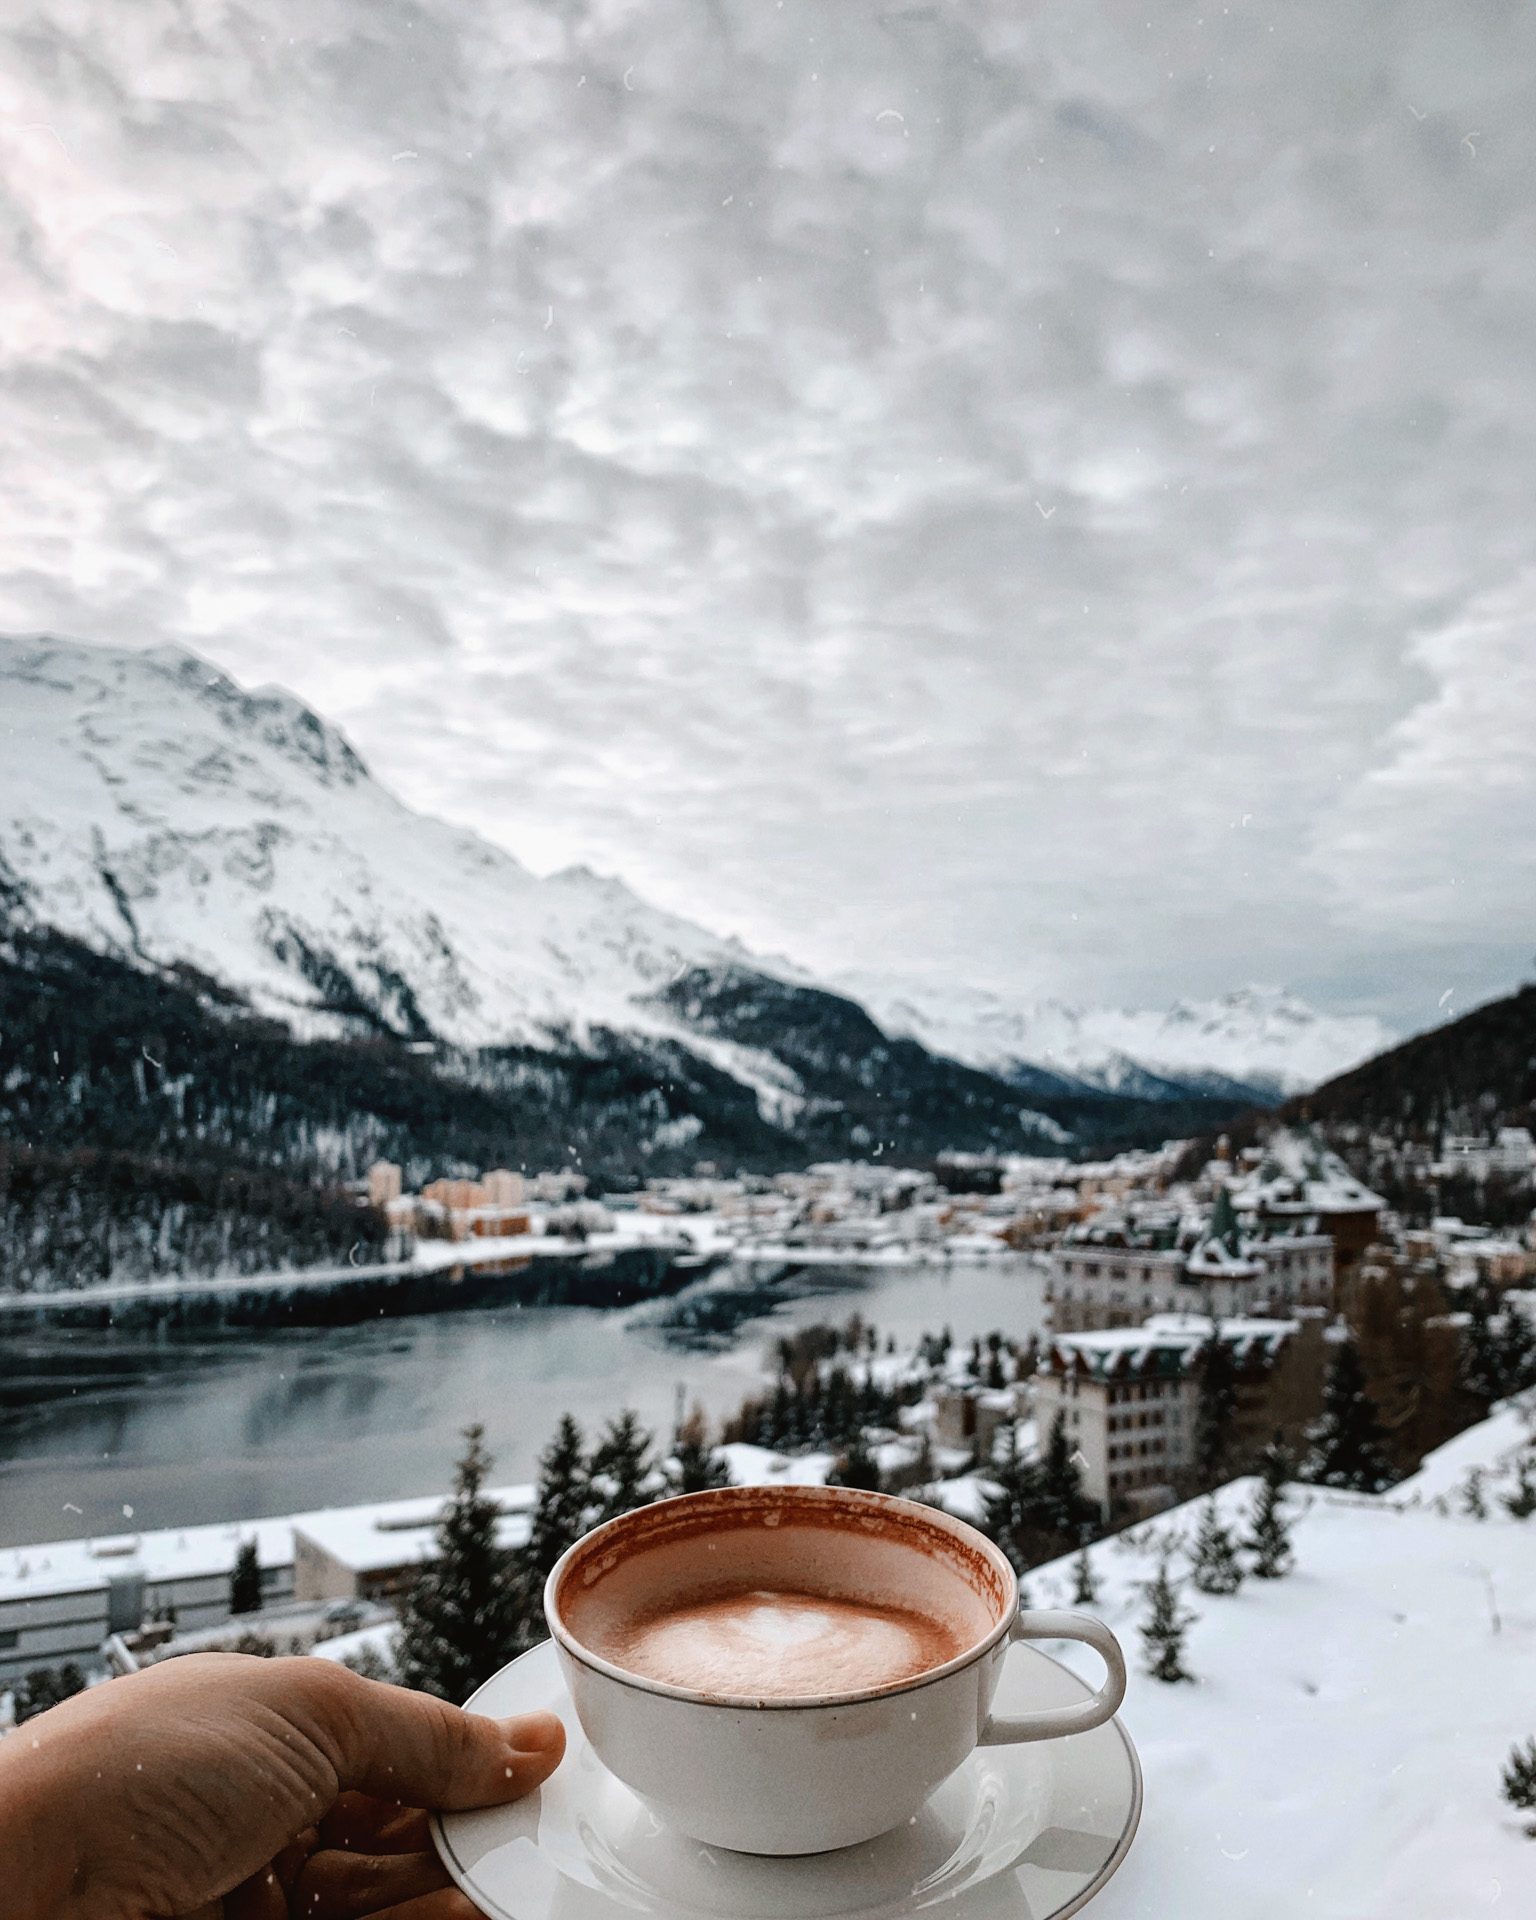 Swiss Deluxe Hotels Stories Winter 2020 The Call Of The Mountains 01 Credit Nikita Sibilev Ecirgb